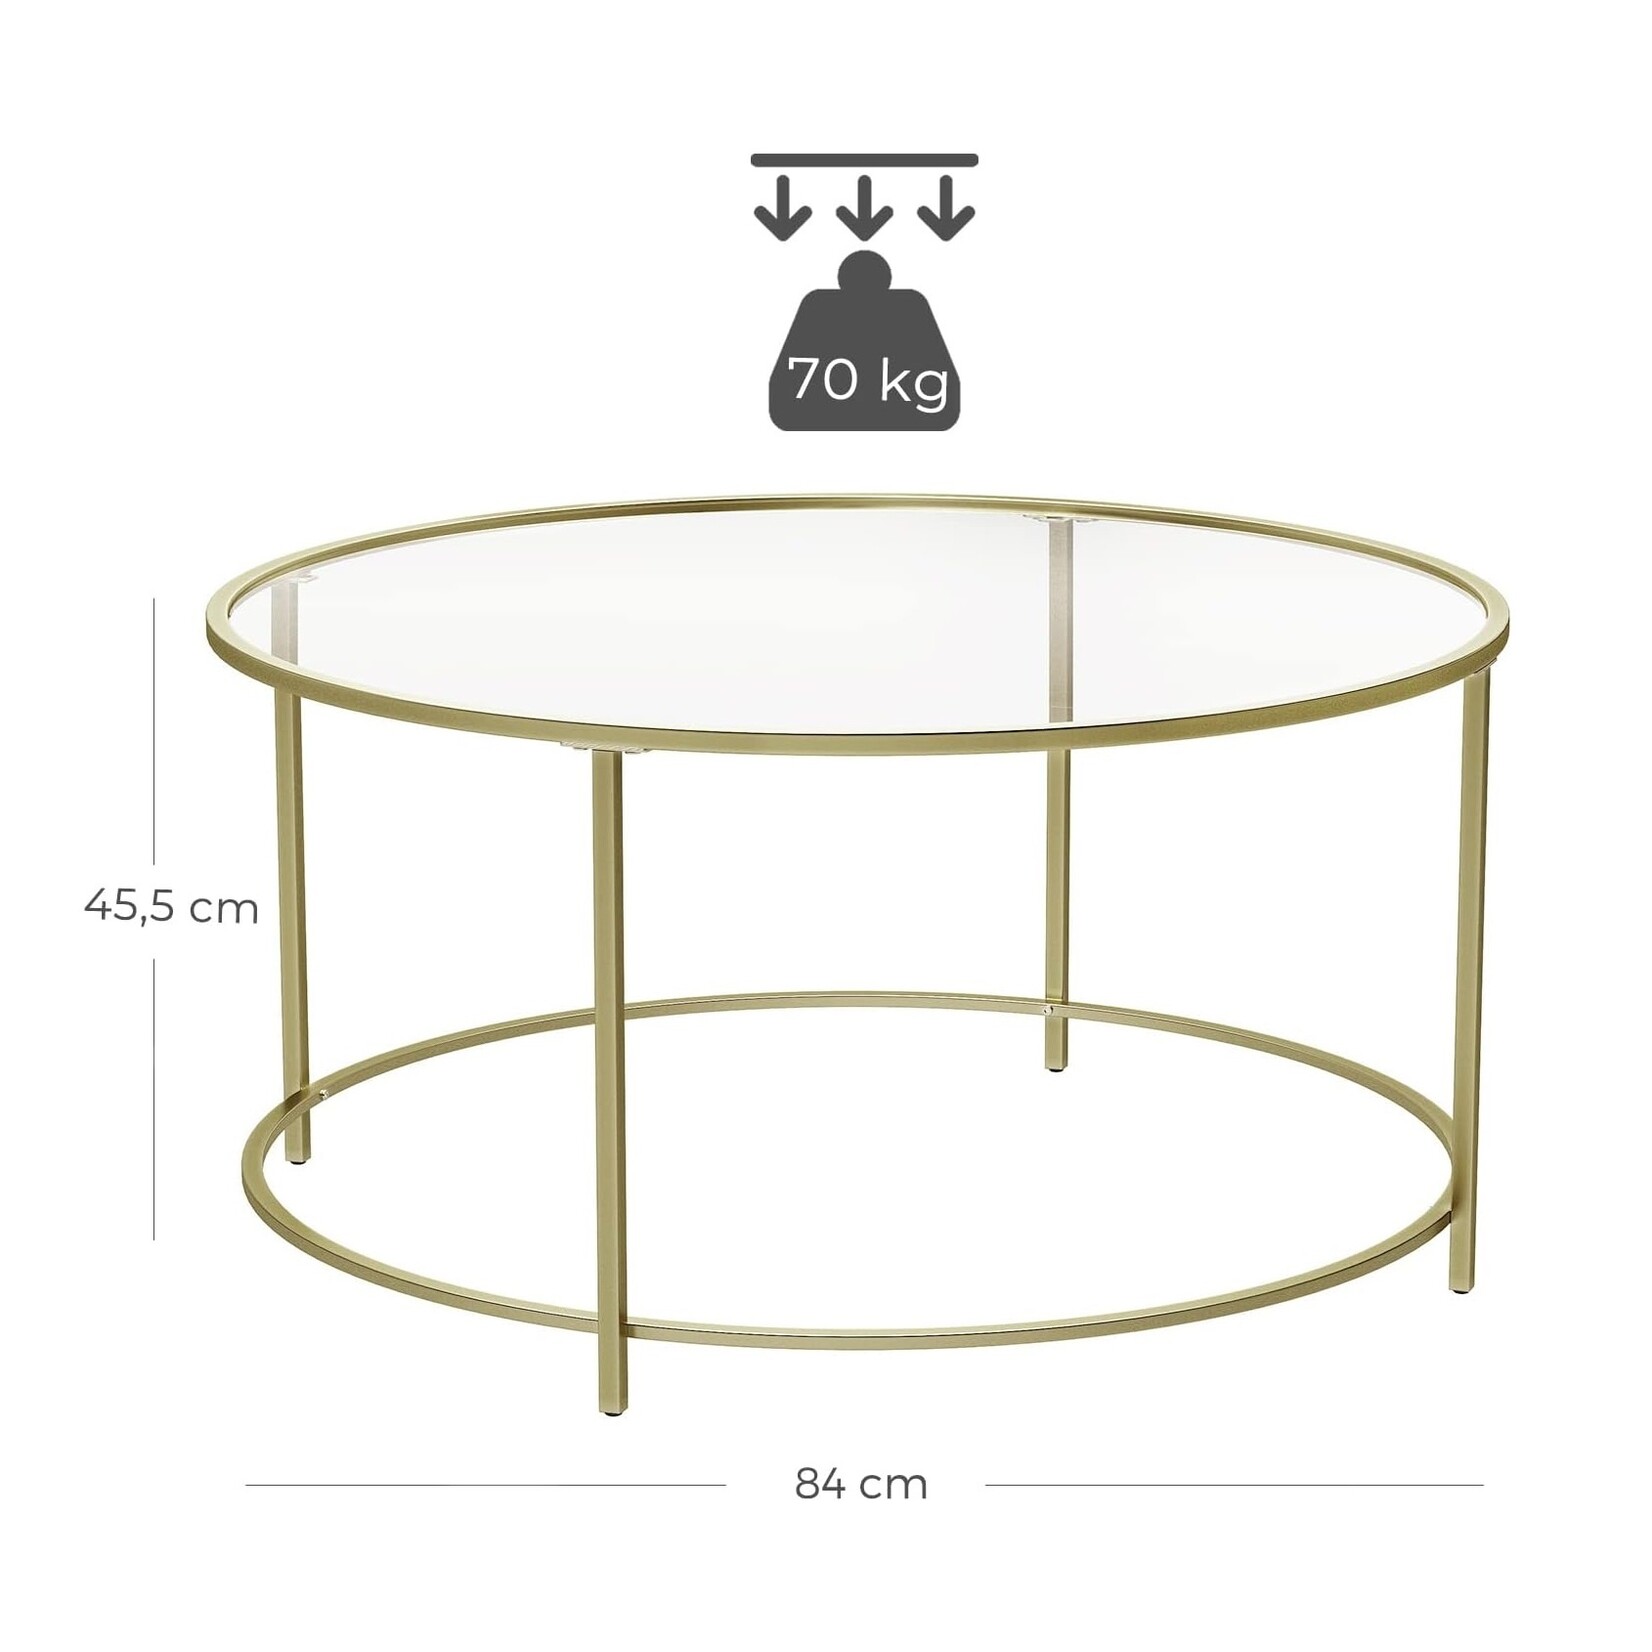 Bobbel Home Bobbel Home - Round Coffee Table - Glass Plate - Metal Frame - Coffee Table - Gold